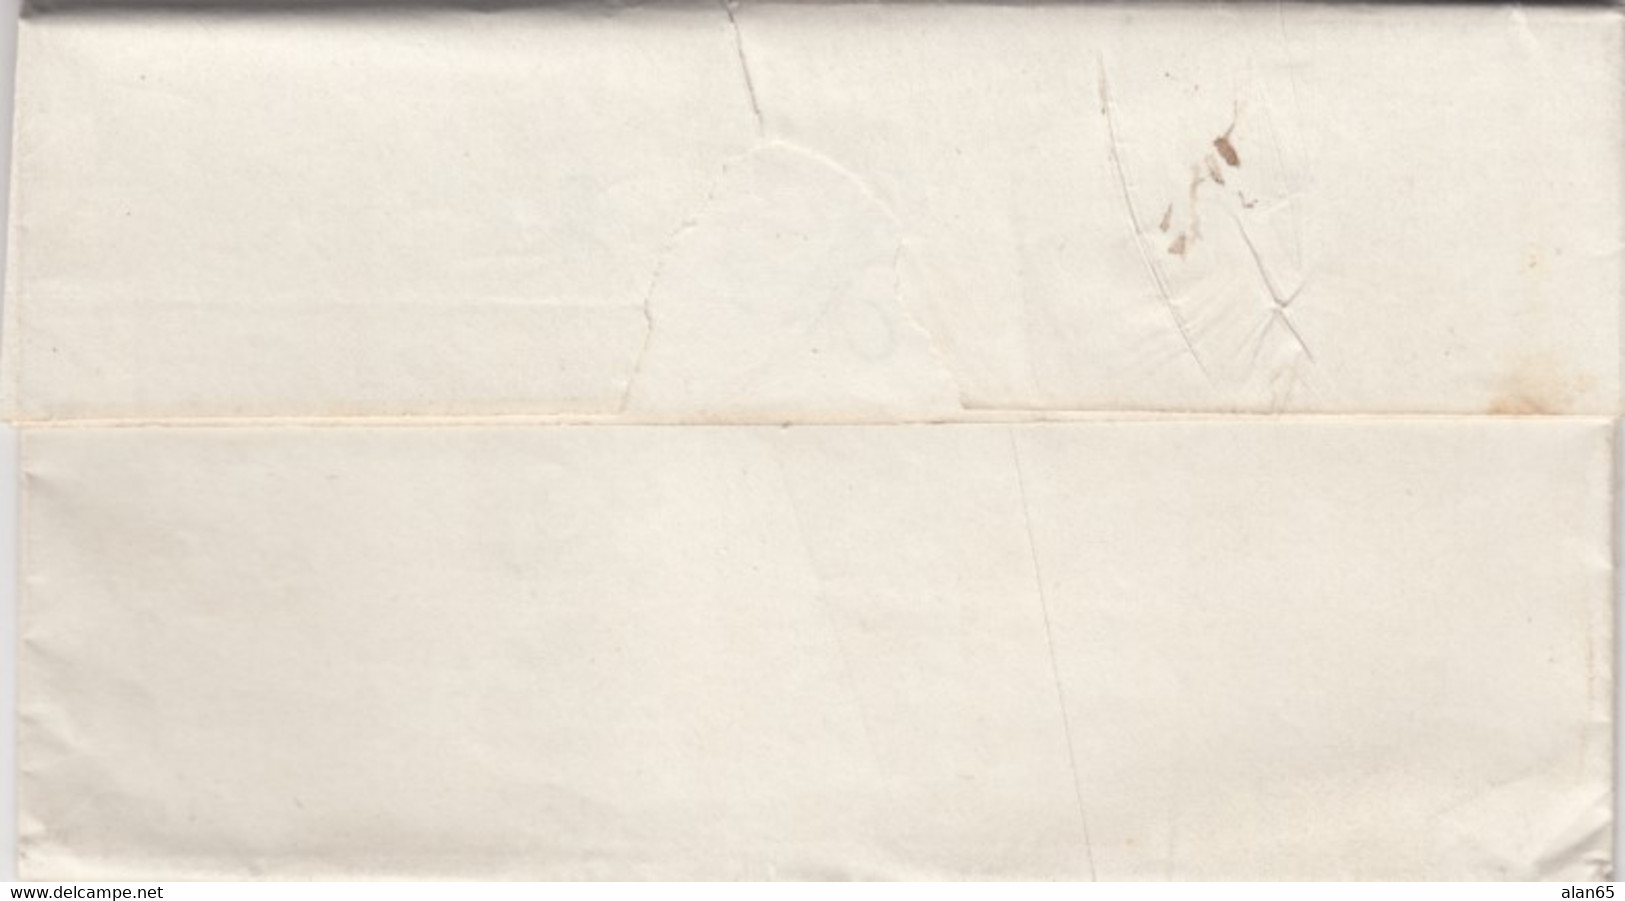 Stampless Cover, Williamsport Md (Maryland), Black Oval To Hagers Town MD 25 November (1834), 18c Rate - …-1845 Vorphilatelie